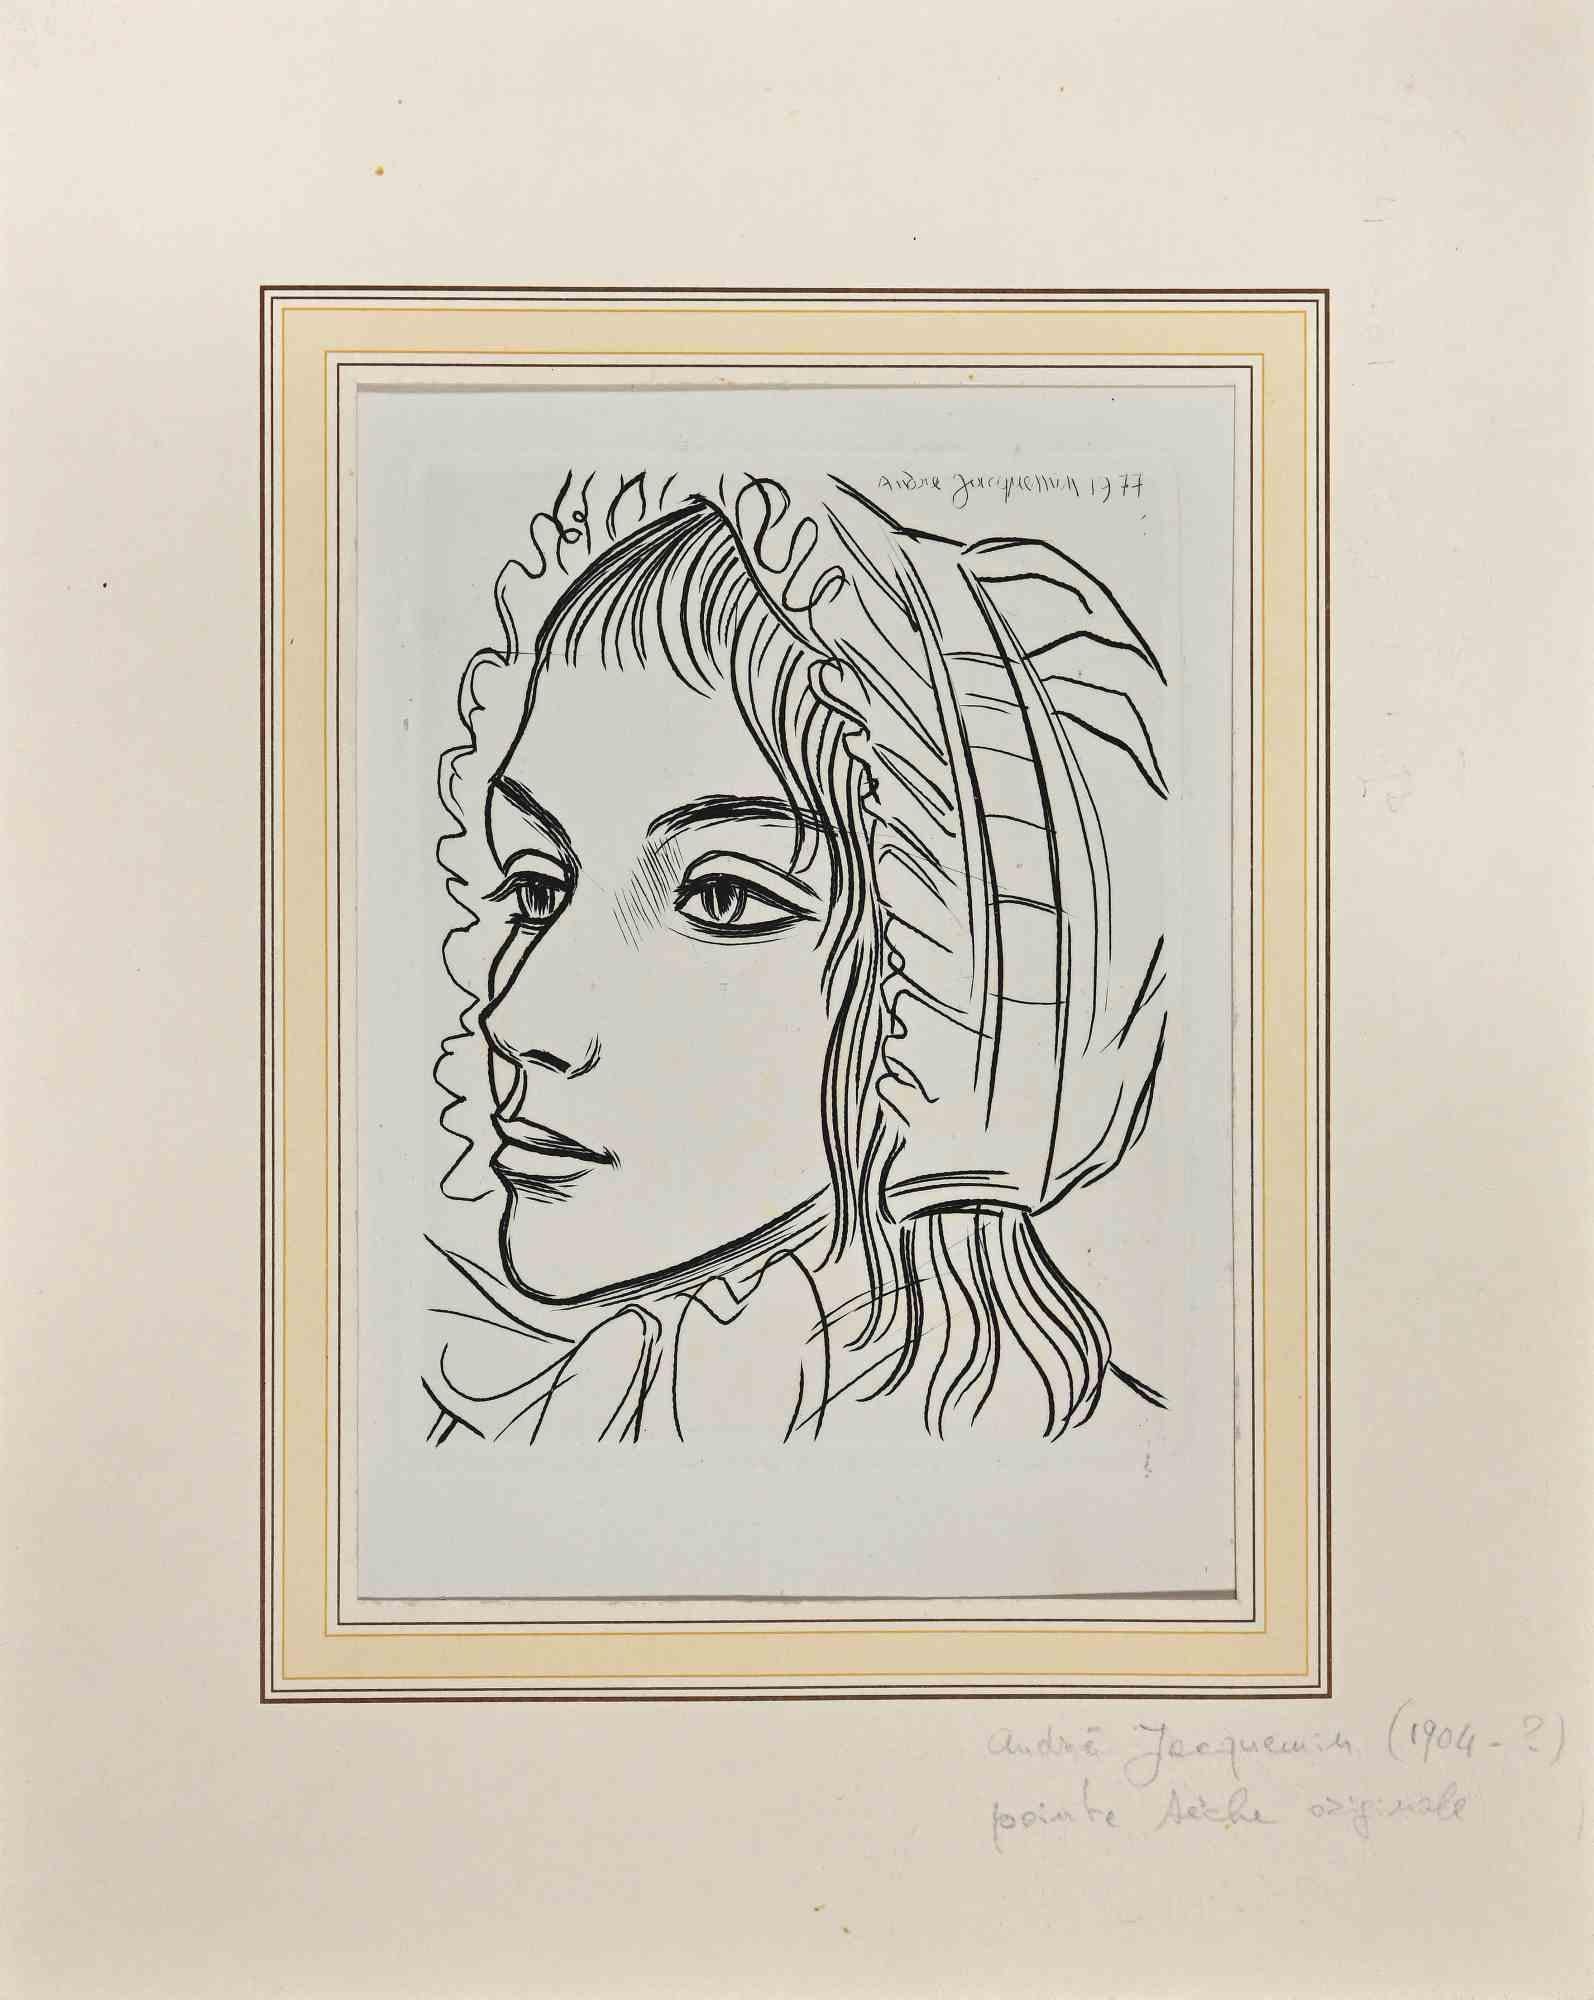 The Maid is an original etching on ivory-colored paper realized by Andrea Jacquin in the mid-20th century.

Plate-signed

Very good conditions.